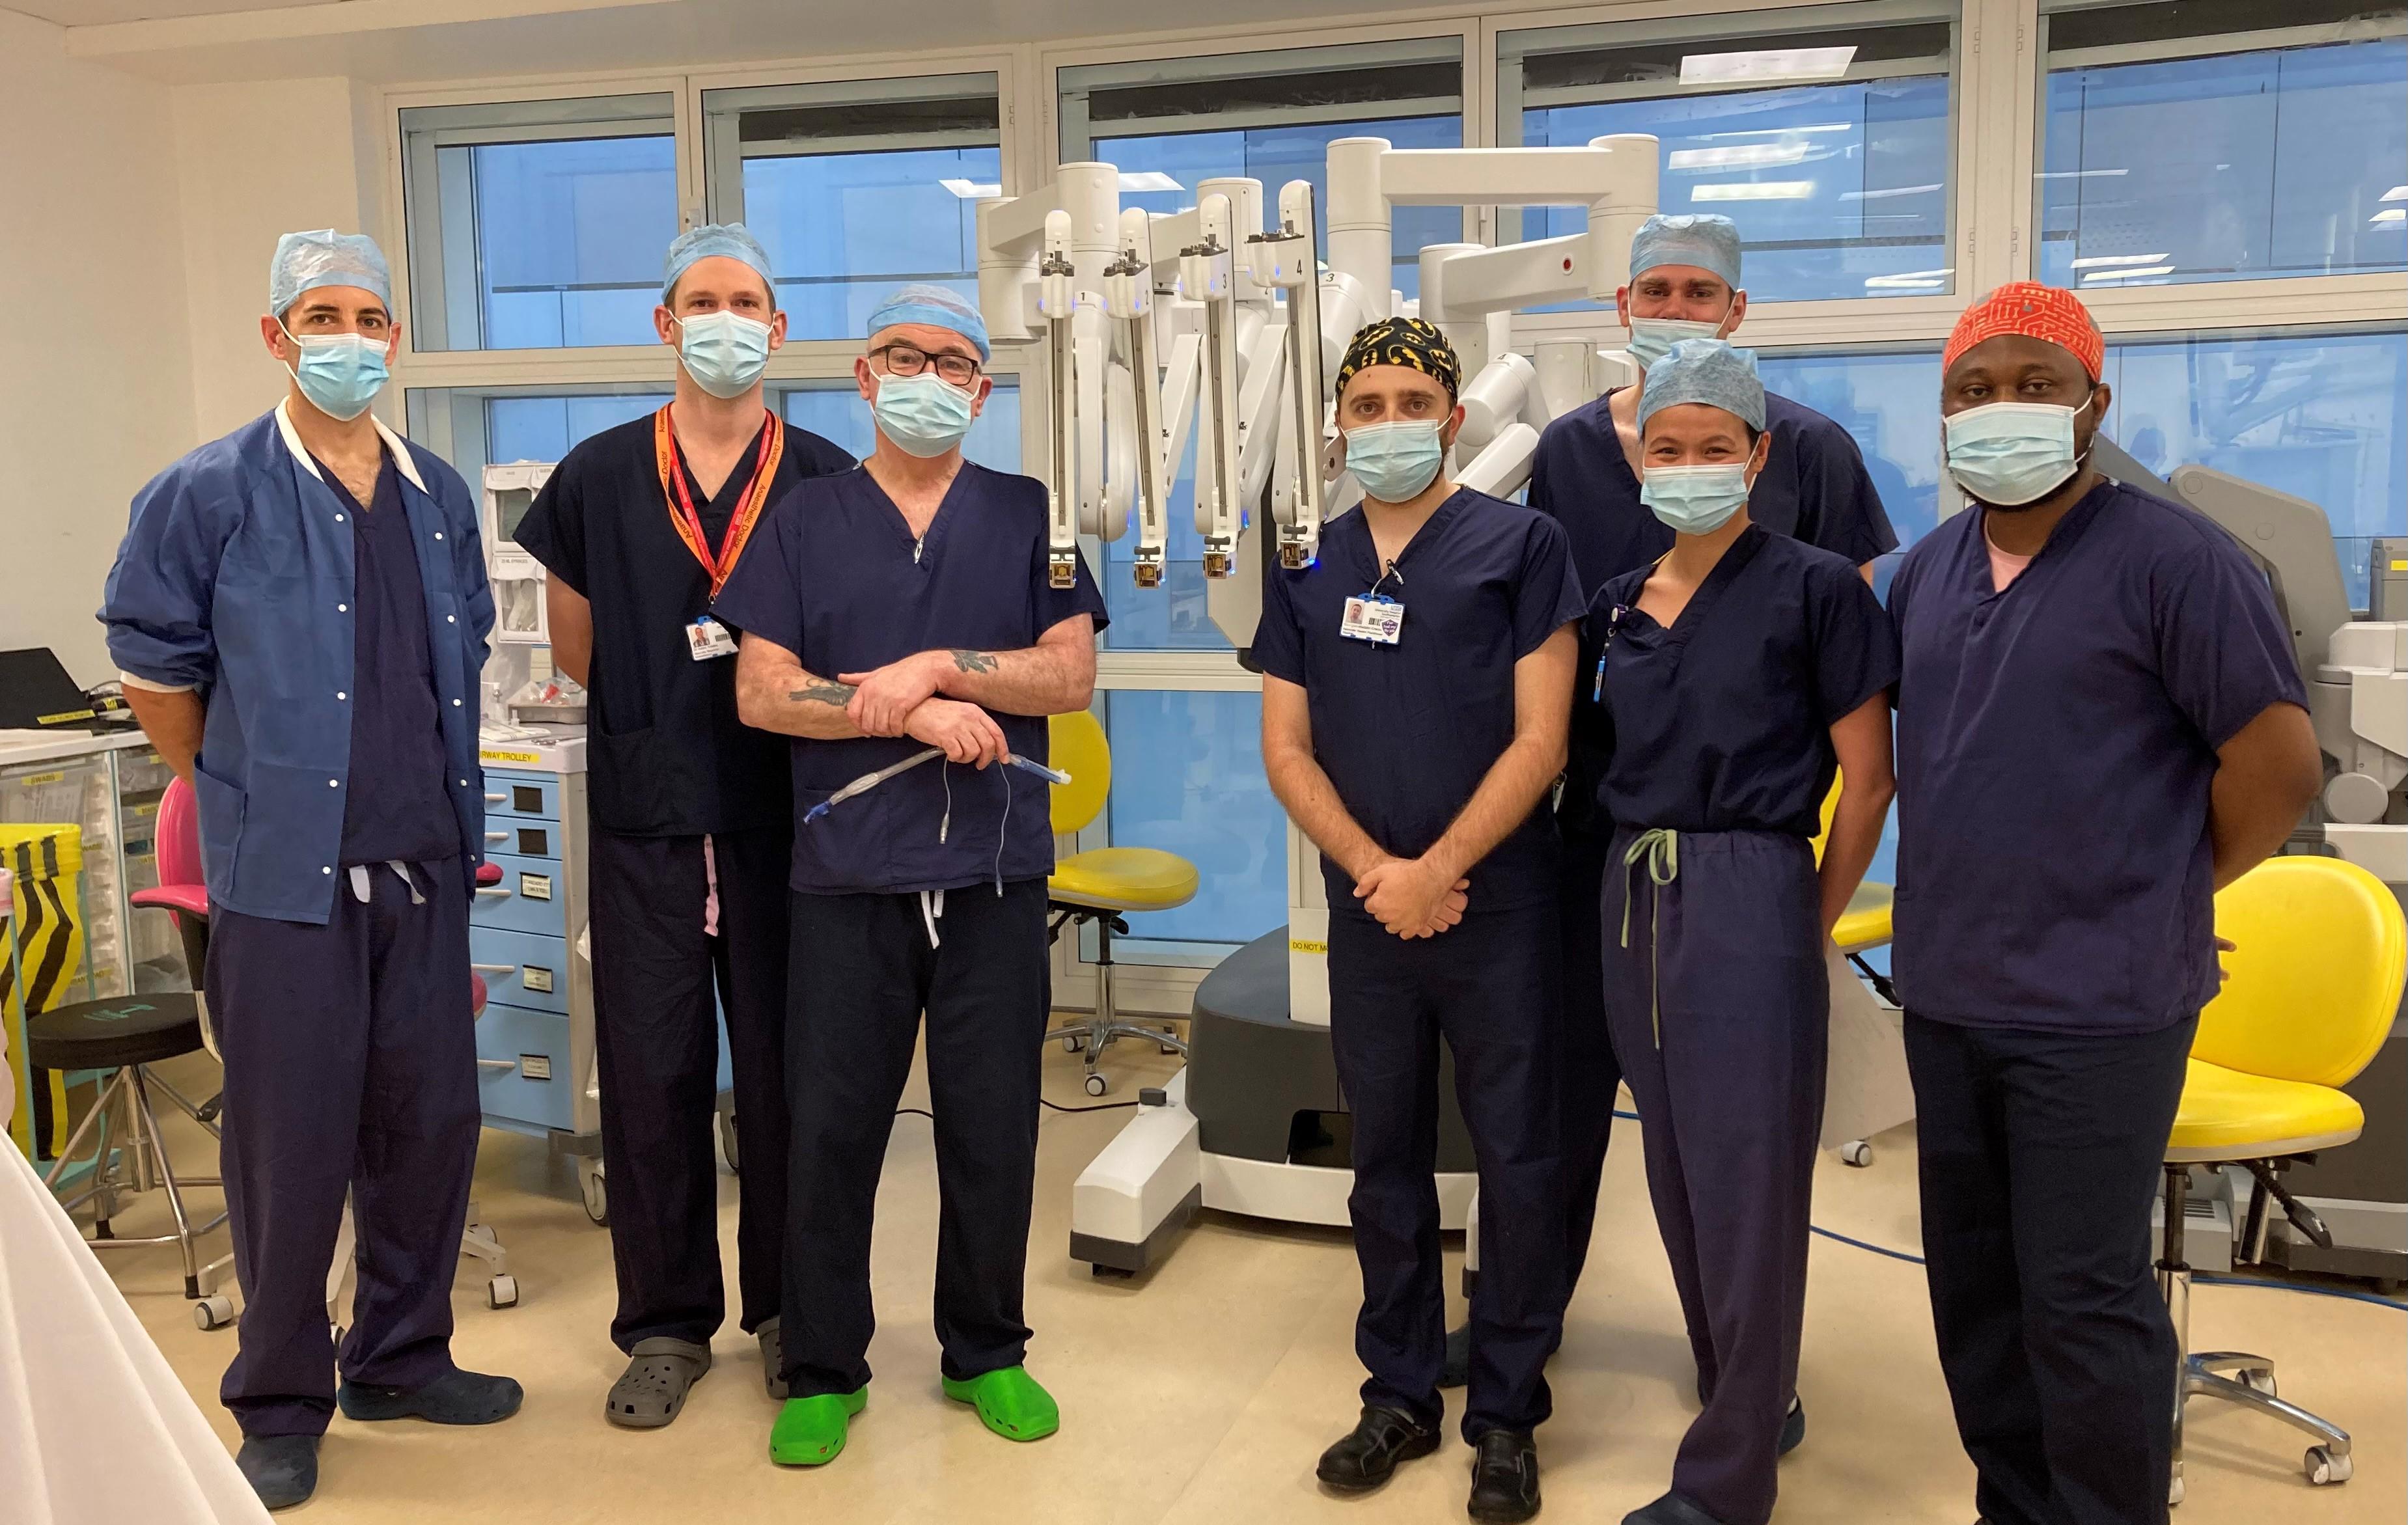 The thoracic surgery team